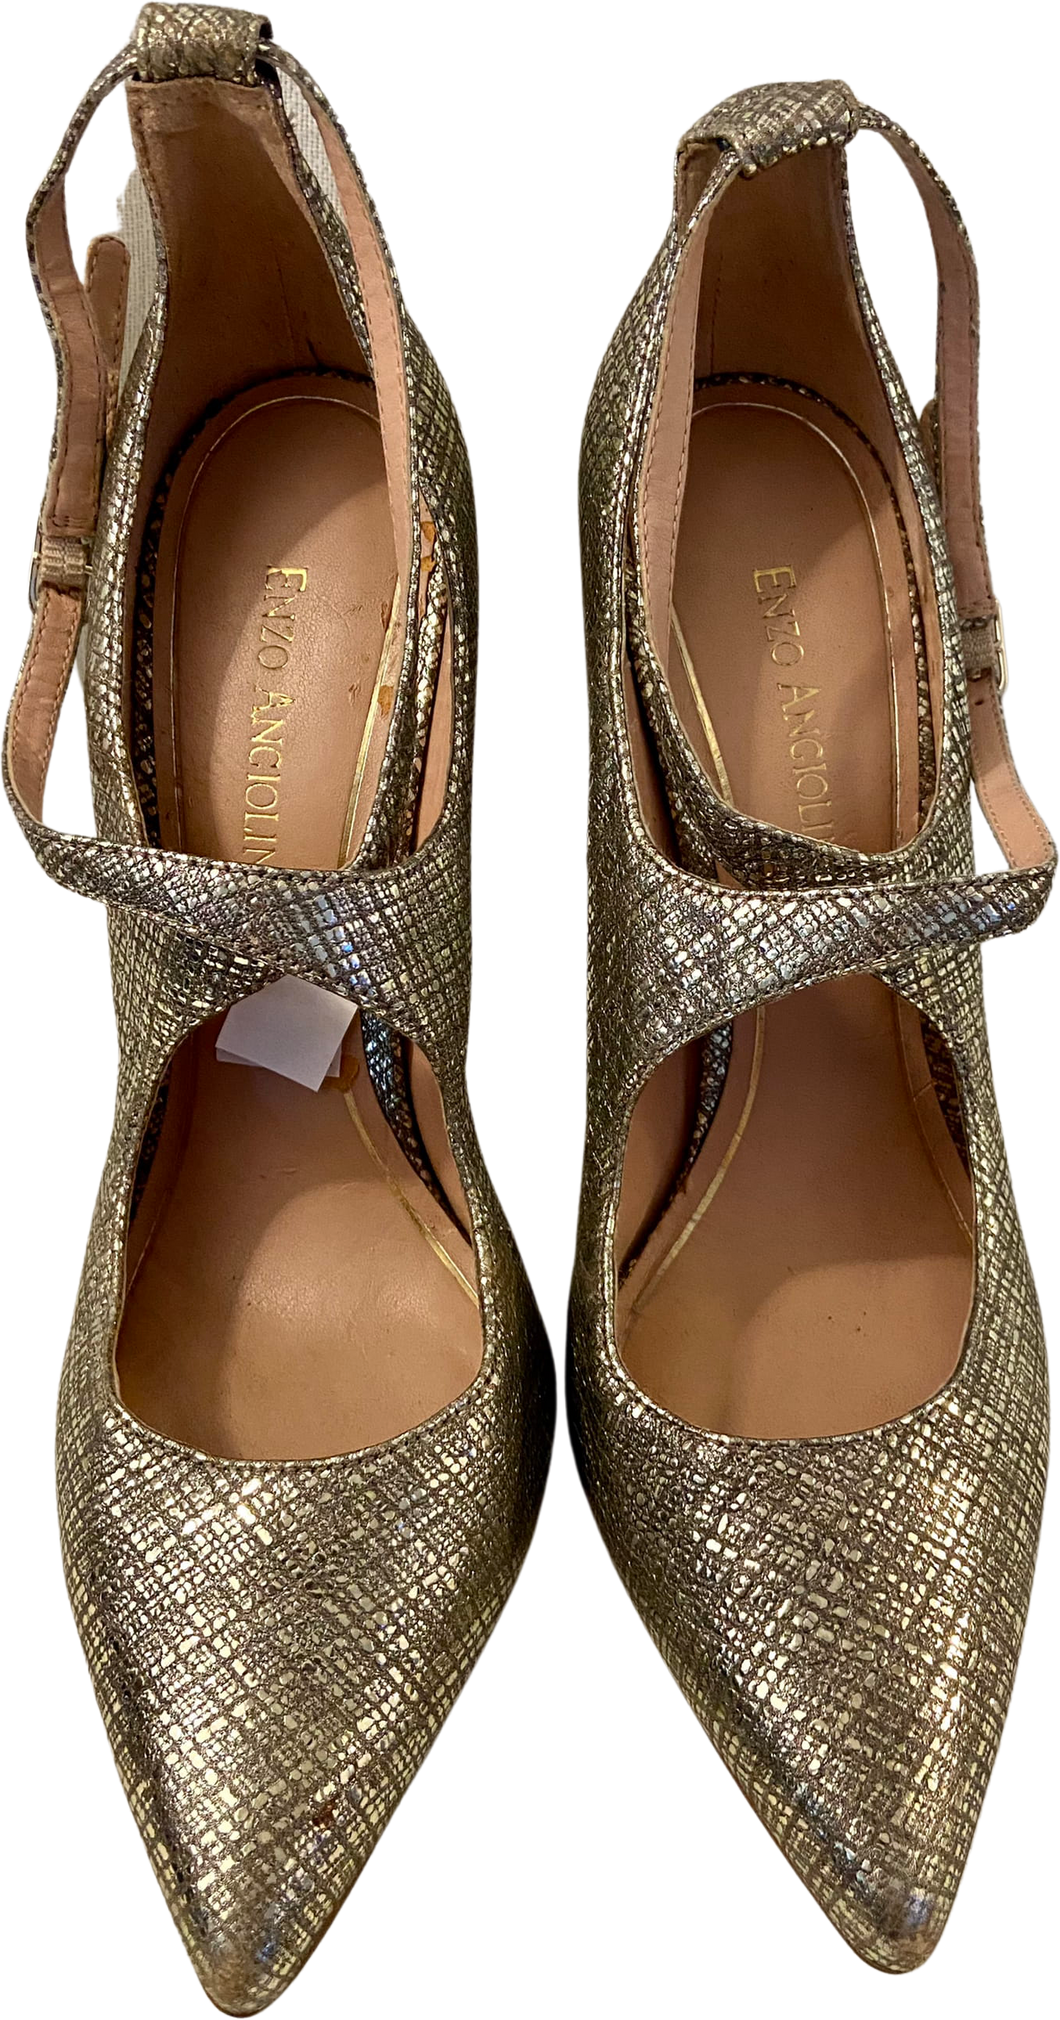 Womens 2 Ankle Strap Gold Heels by Enzo Angiolini's